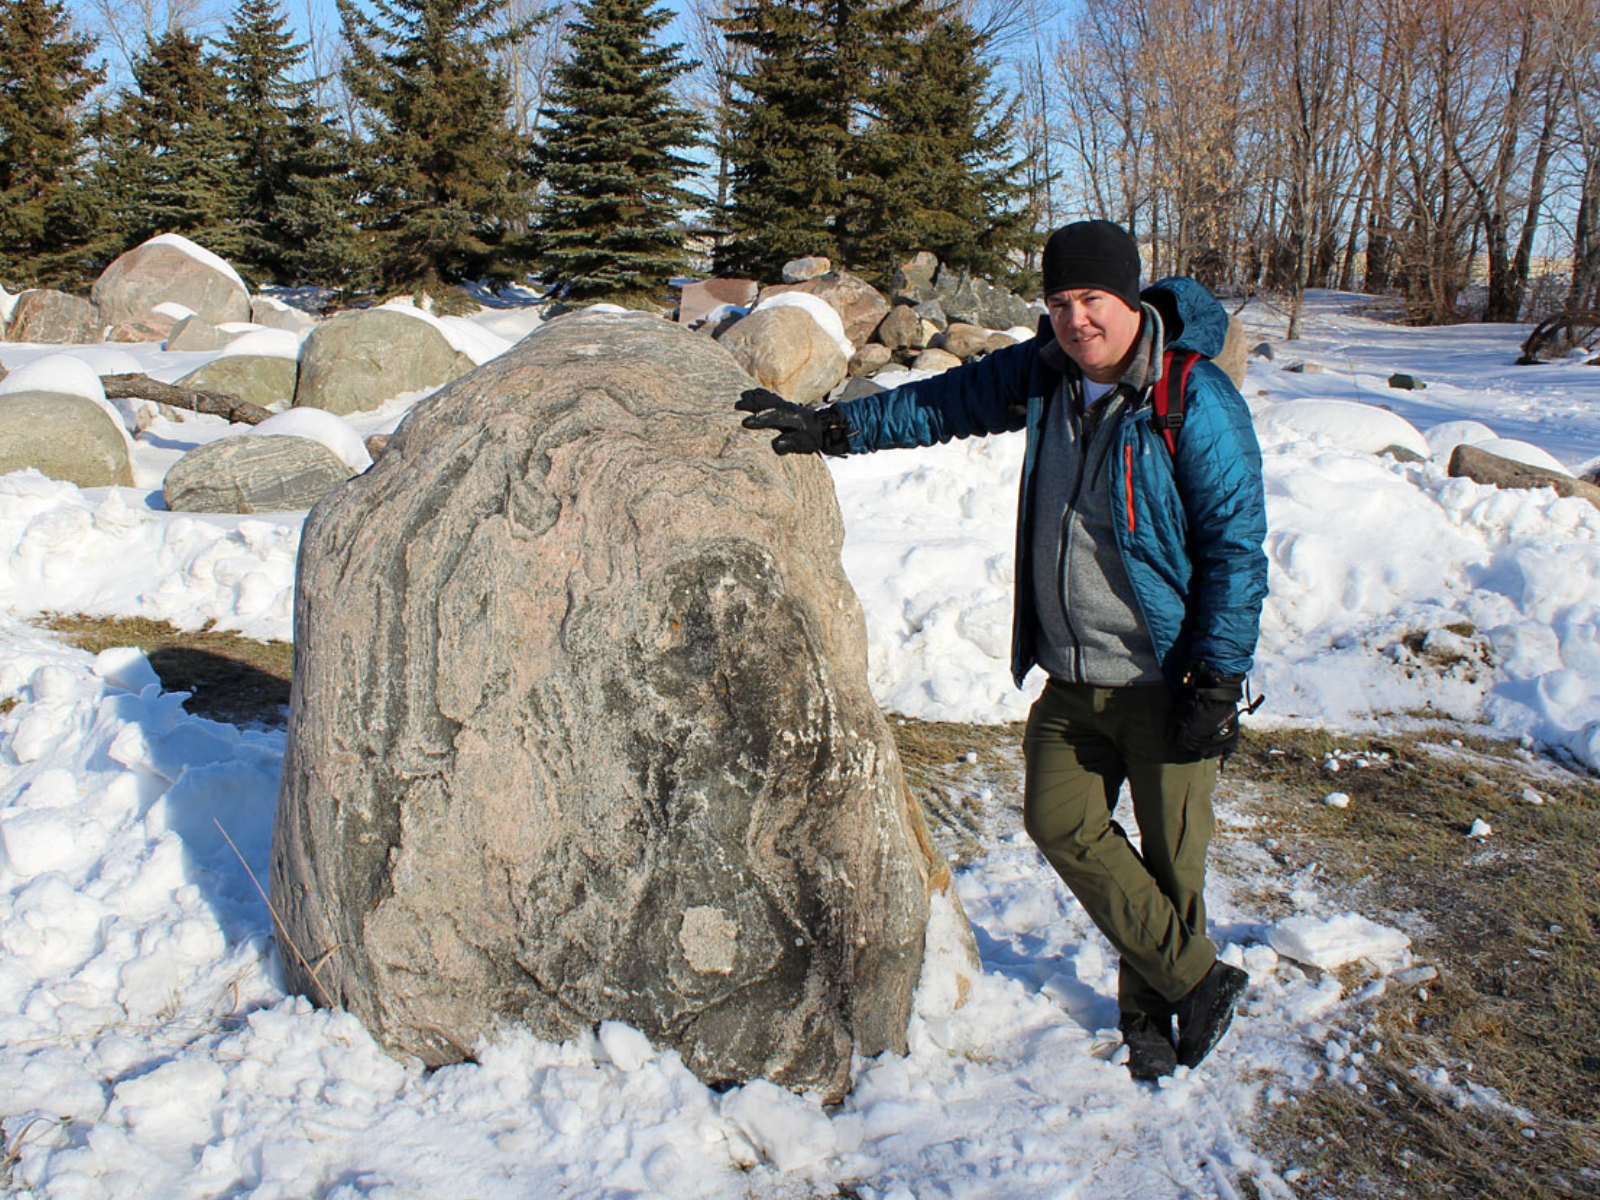 A person wearing winter gear smiles at the camera and leans against a large boulder that comes as high as their shoulder.